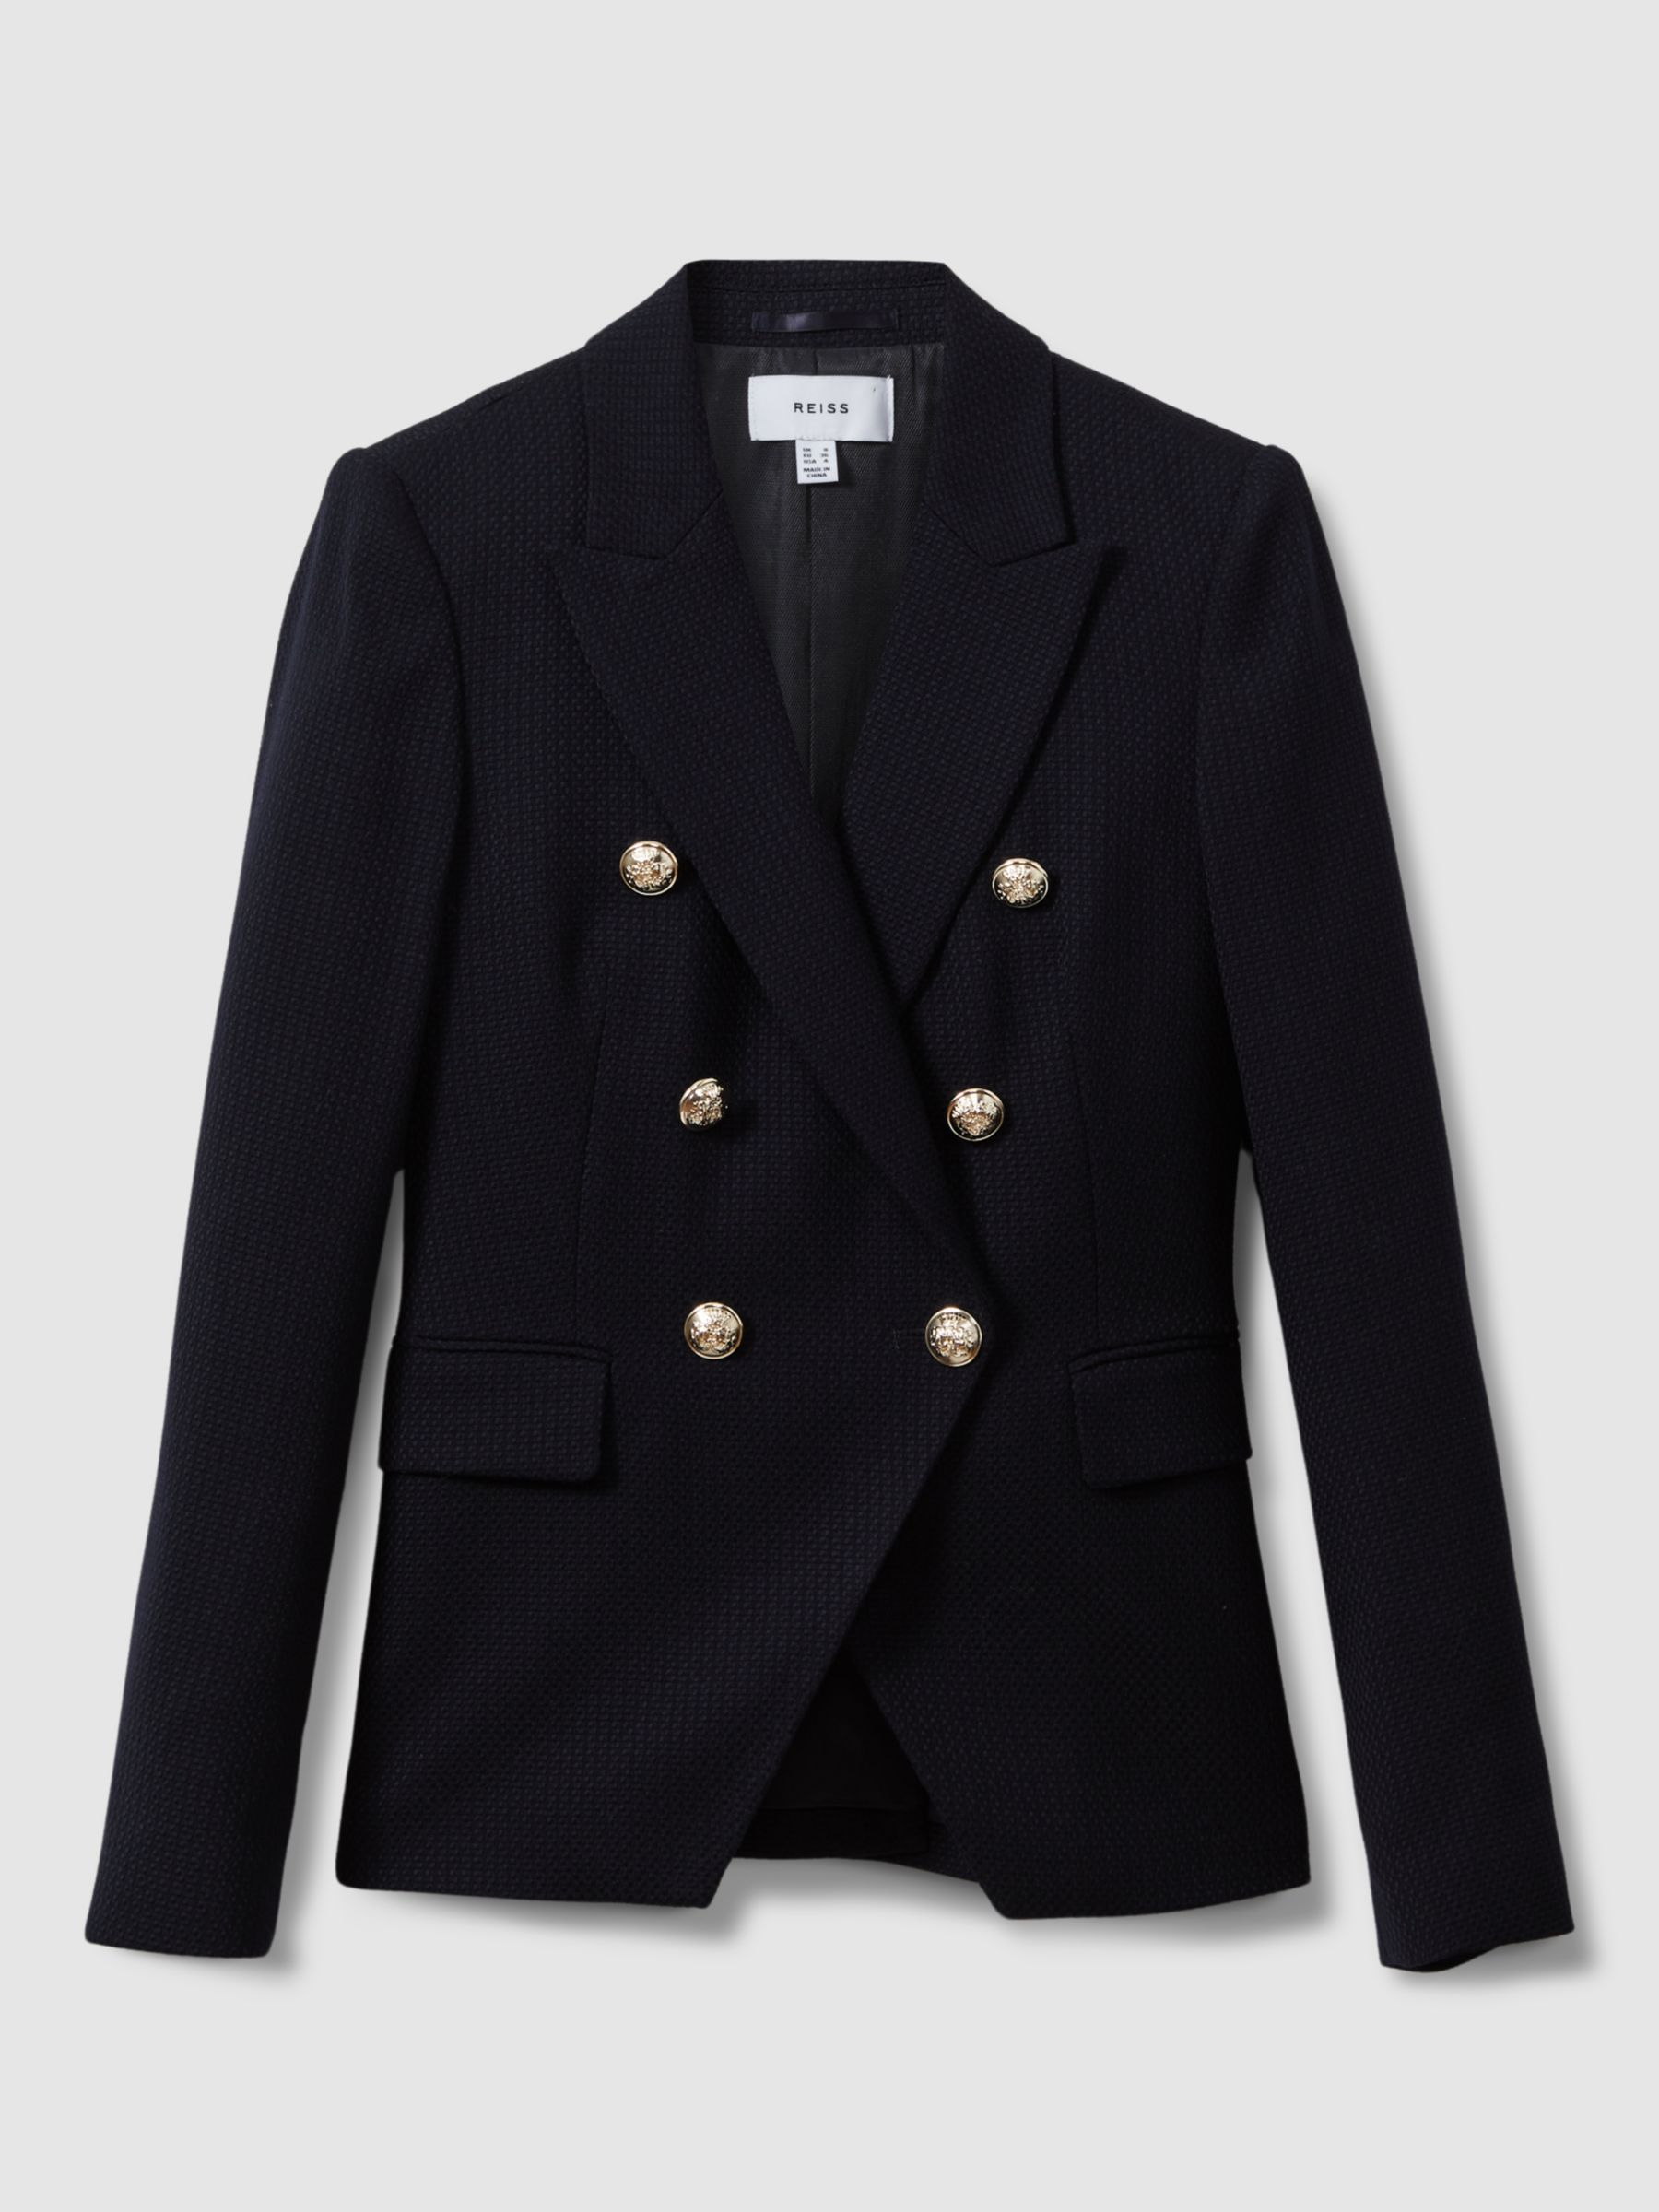 Buy Reiss Tally Double Breasted Wool Blend Blazer, Navy Online at johnlewis.com